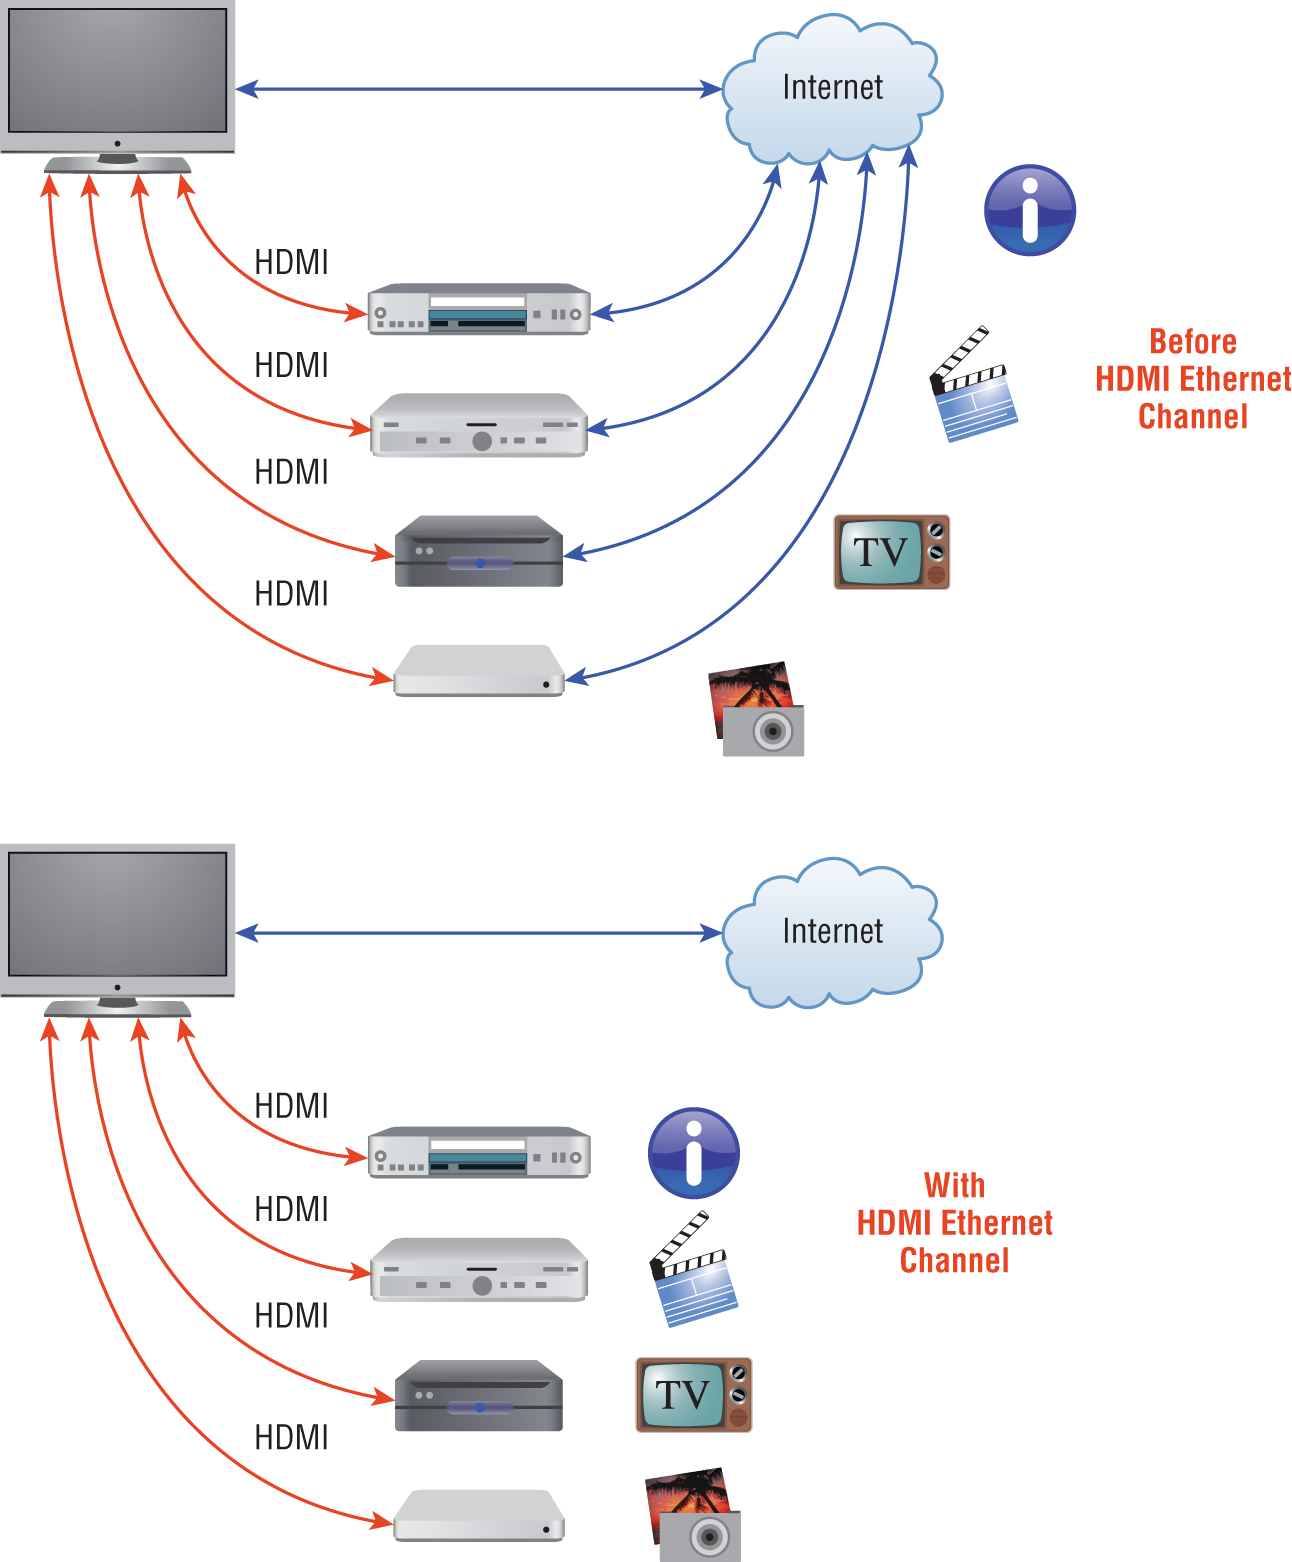 Schematic illustration of ethernet over HDMI